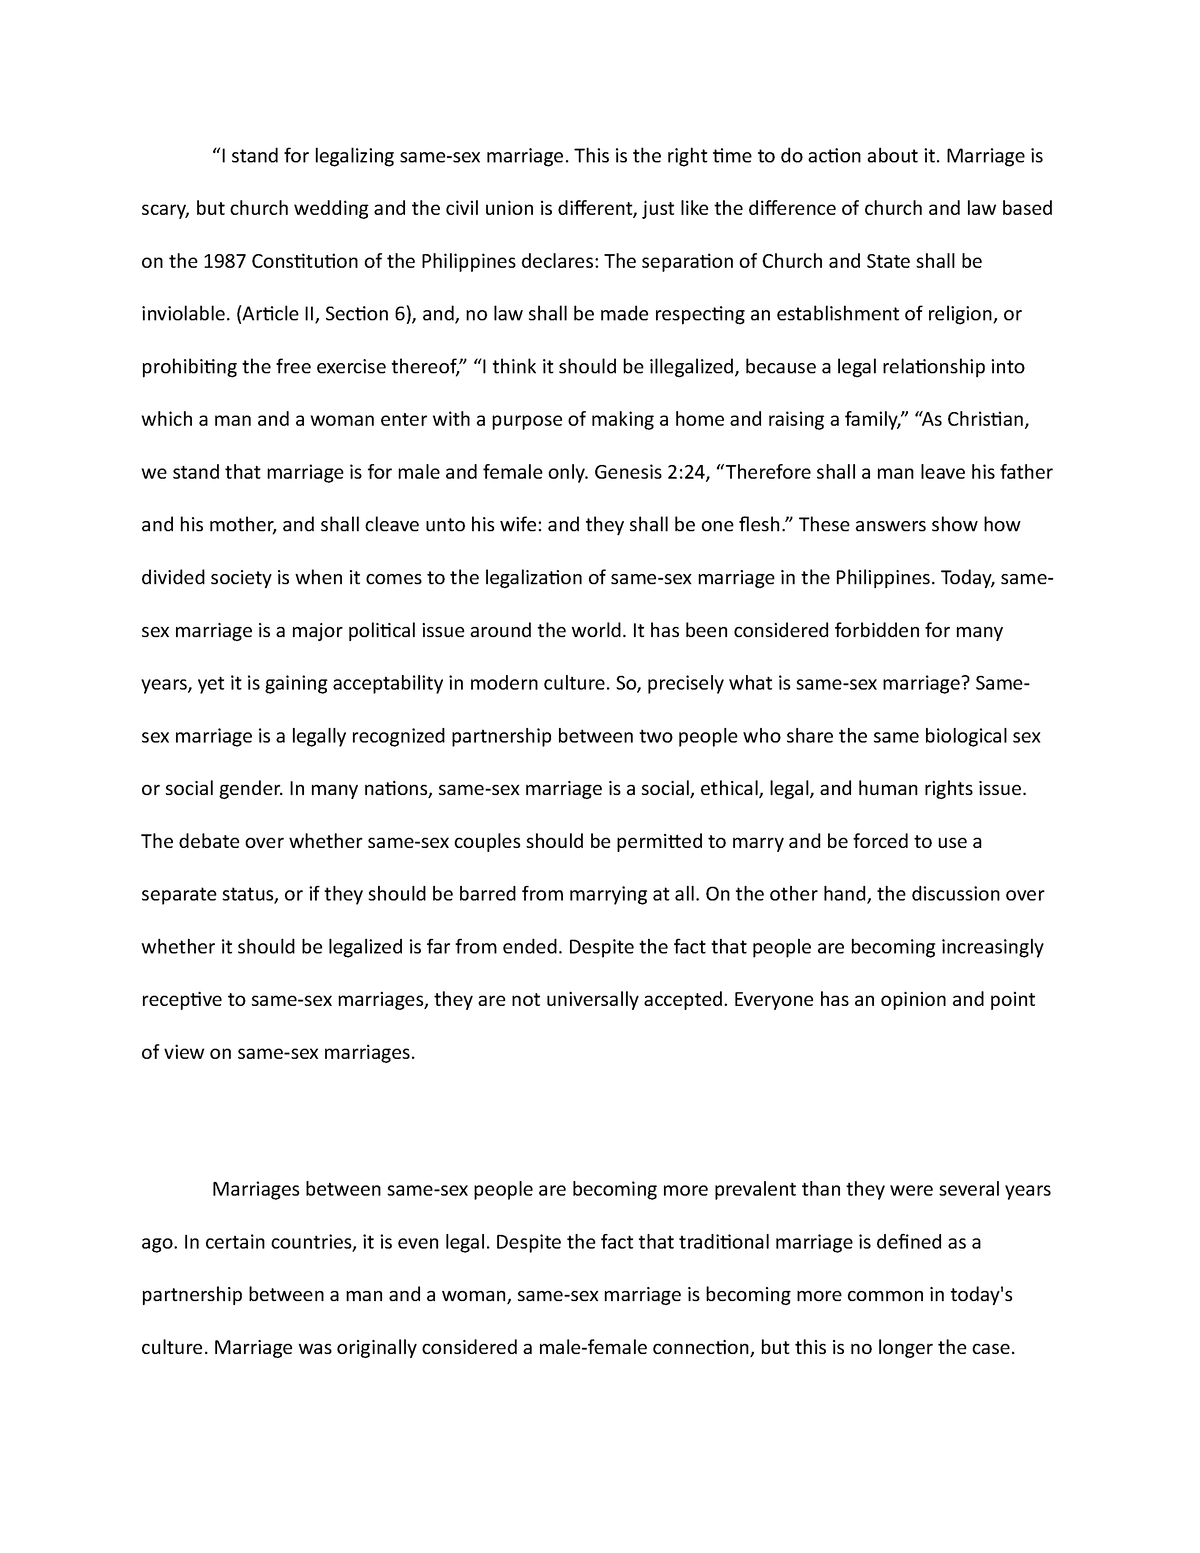 persuasive essay about same sex marriage in the philippines